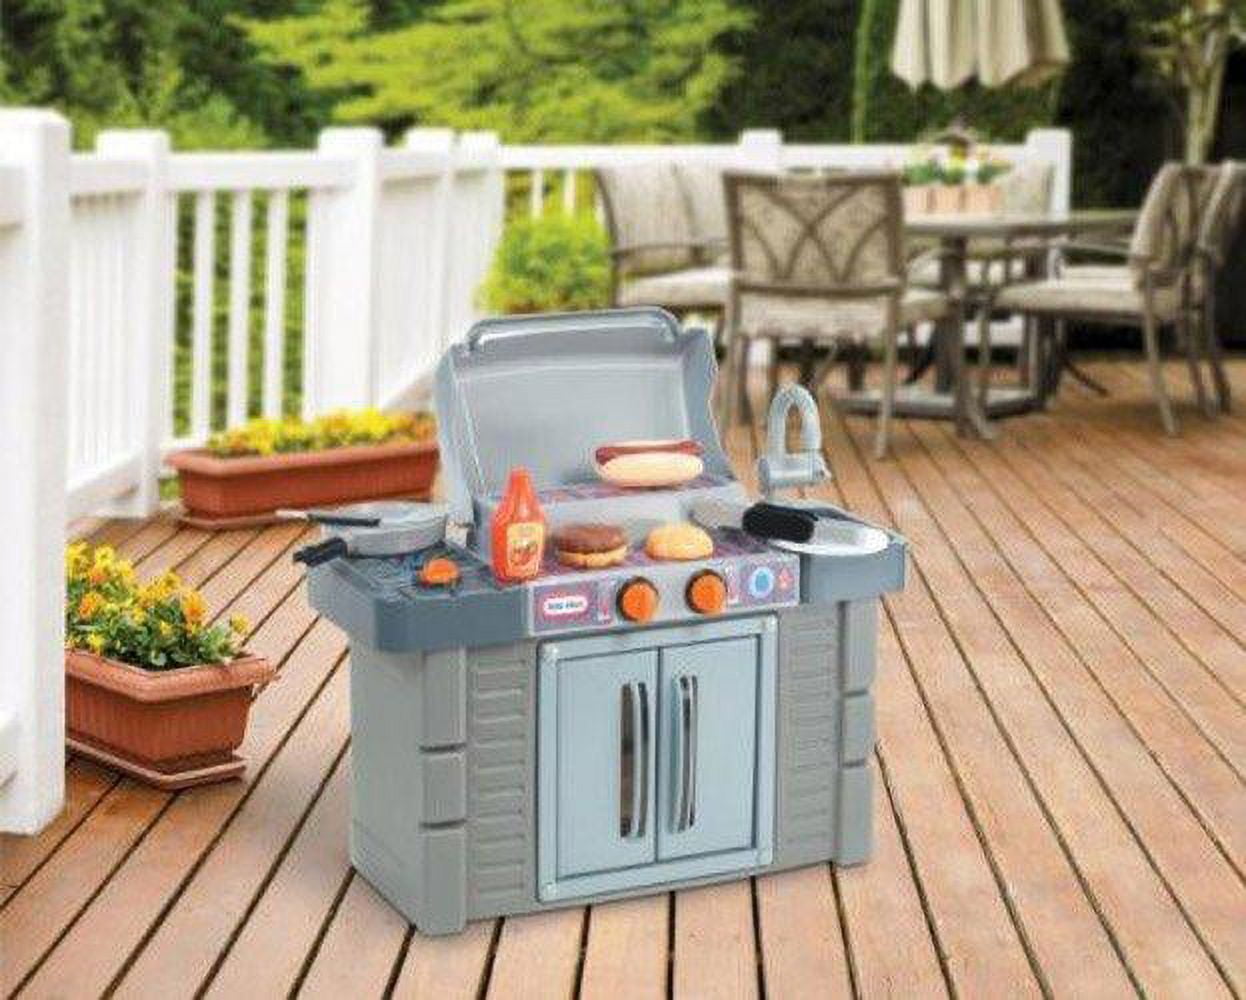 Little Tikes Cook 'n Grow BBQ Grill with Cooking Accessories and